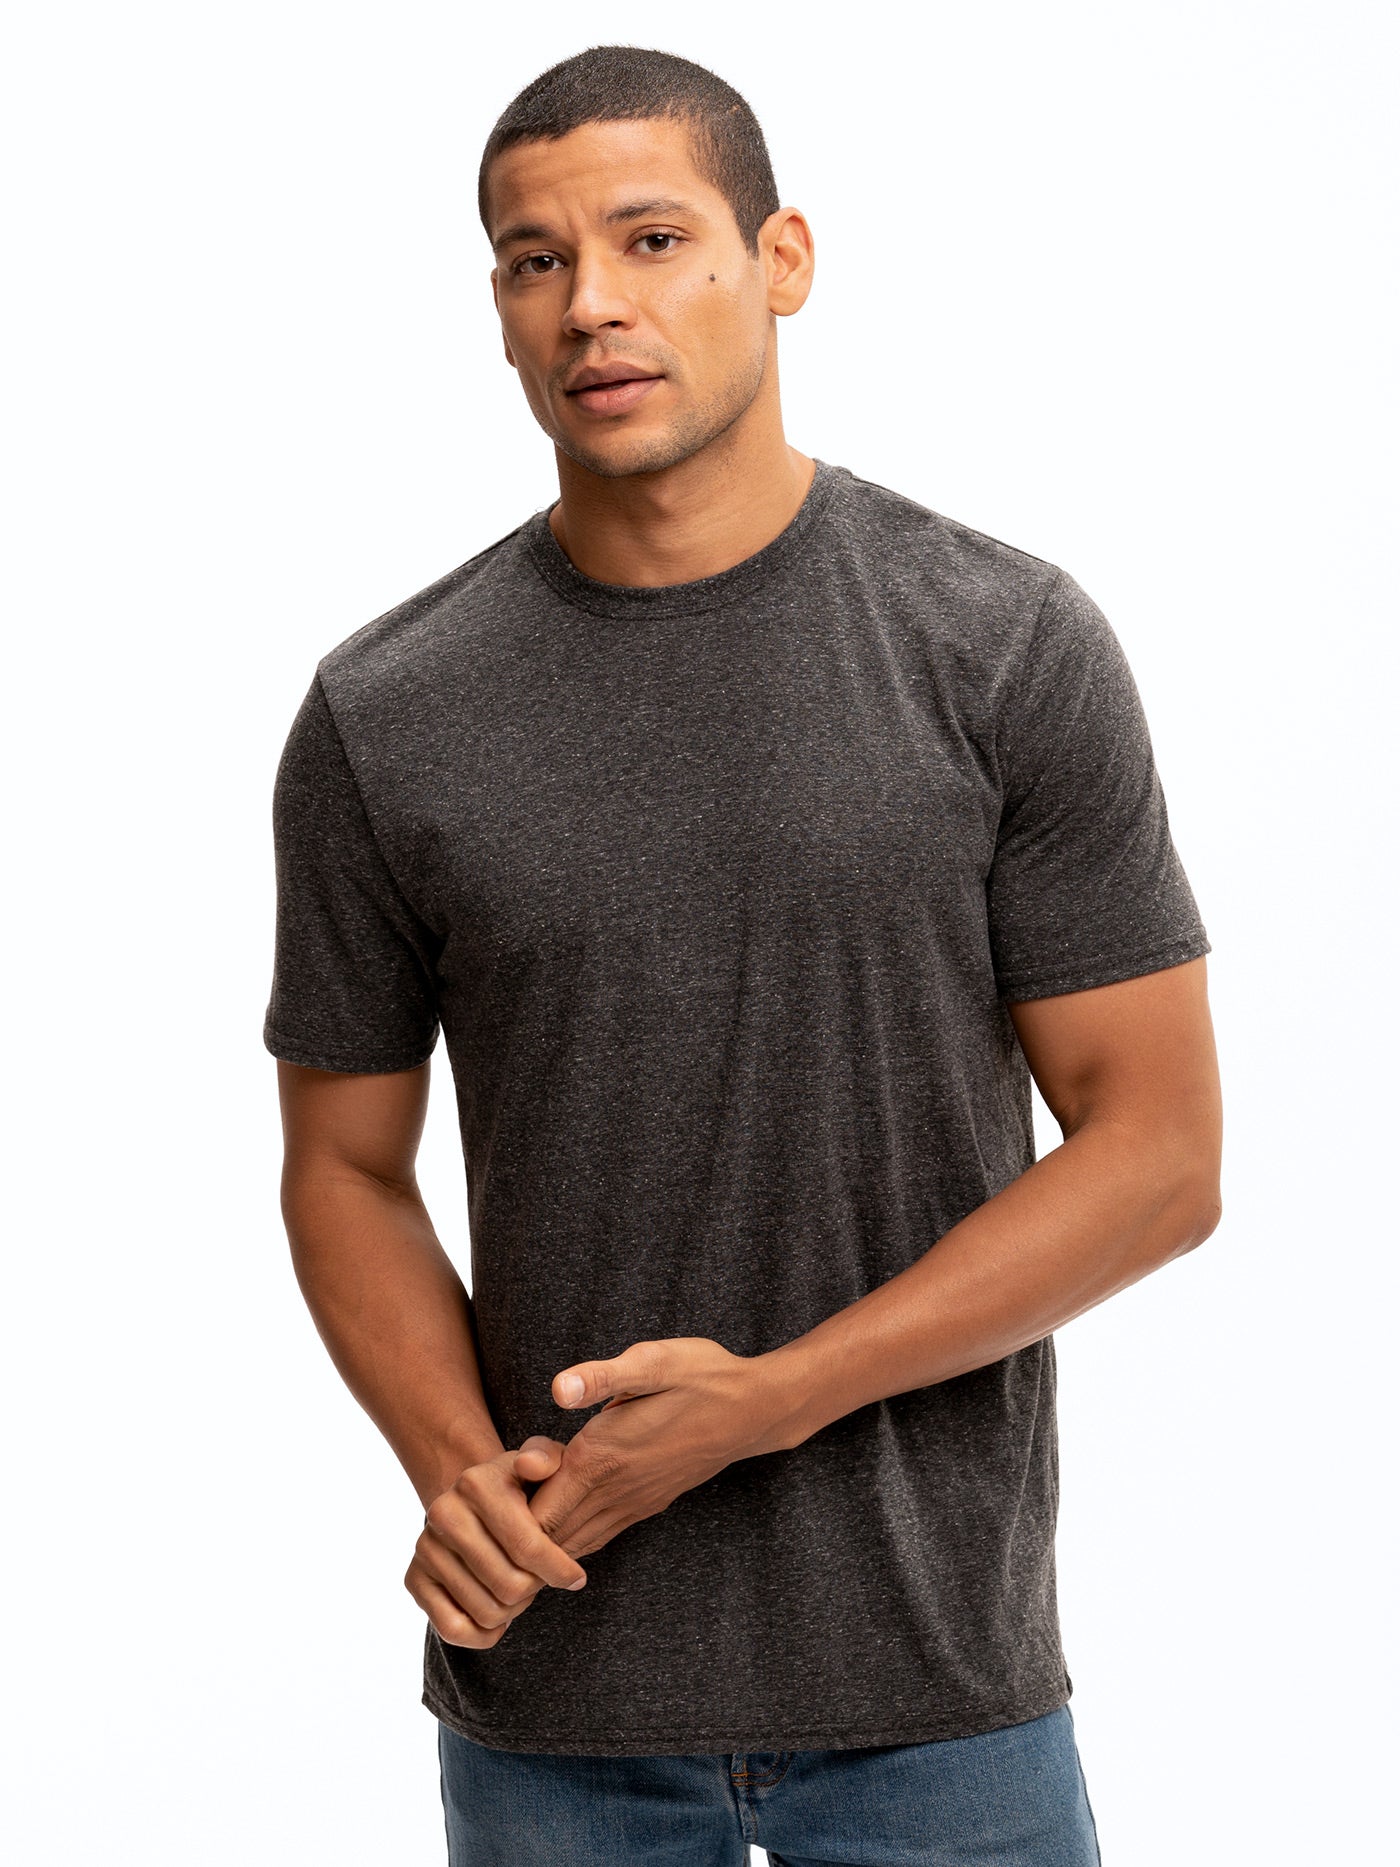 Heather Grey Tee Crew Neck 4 Threads Triblend in Thought –